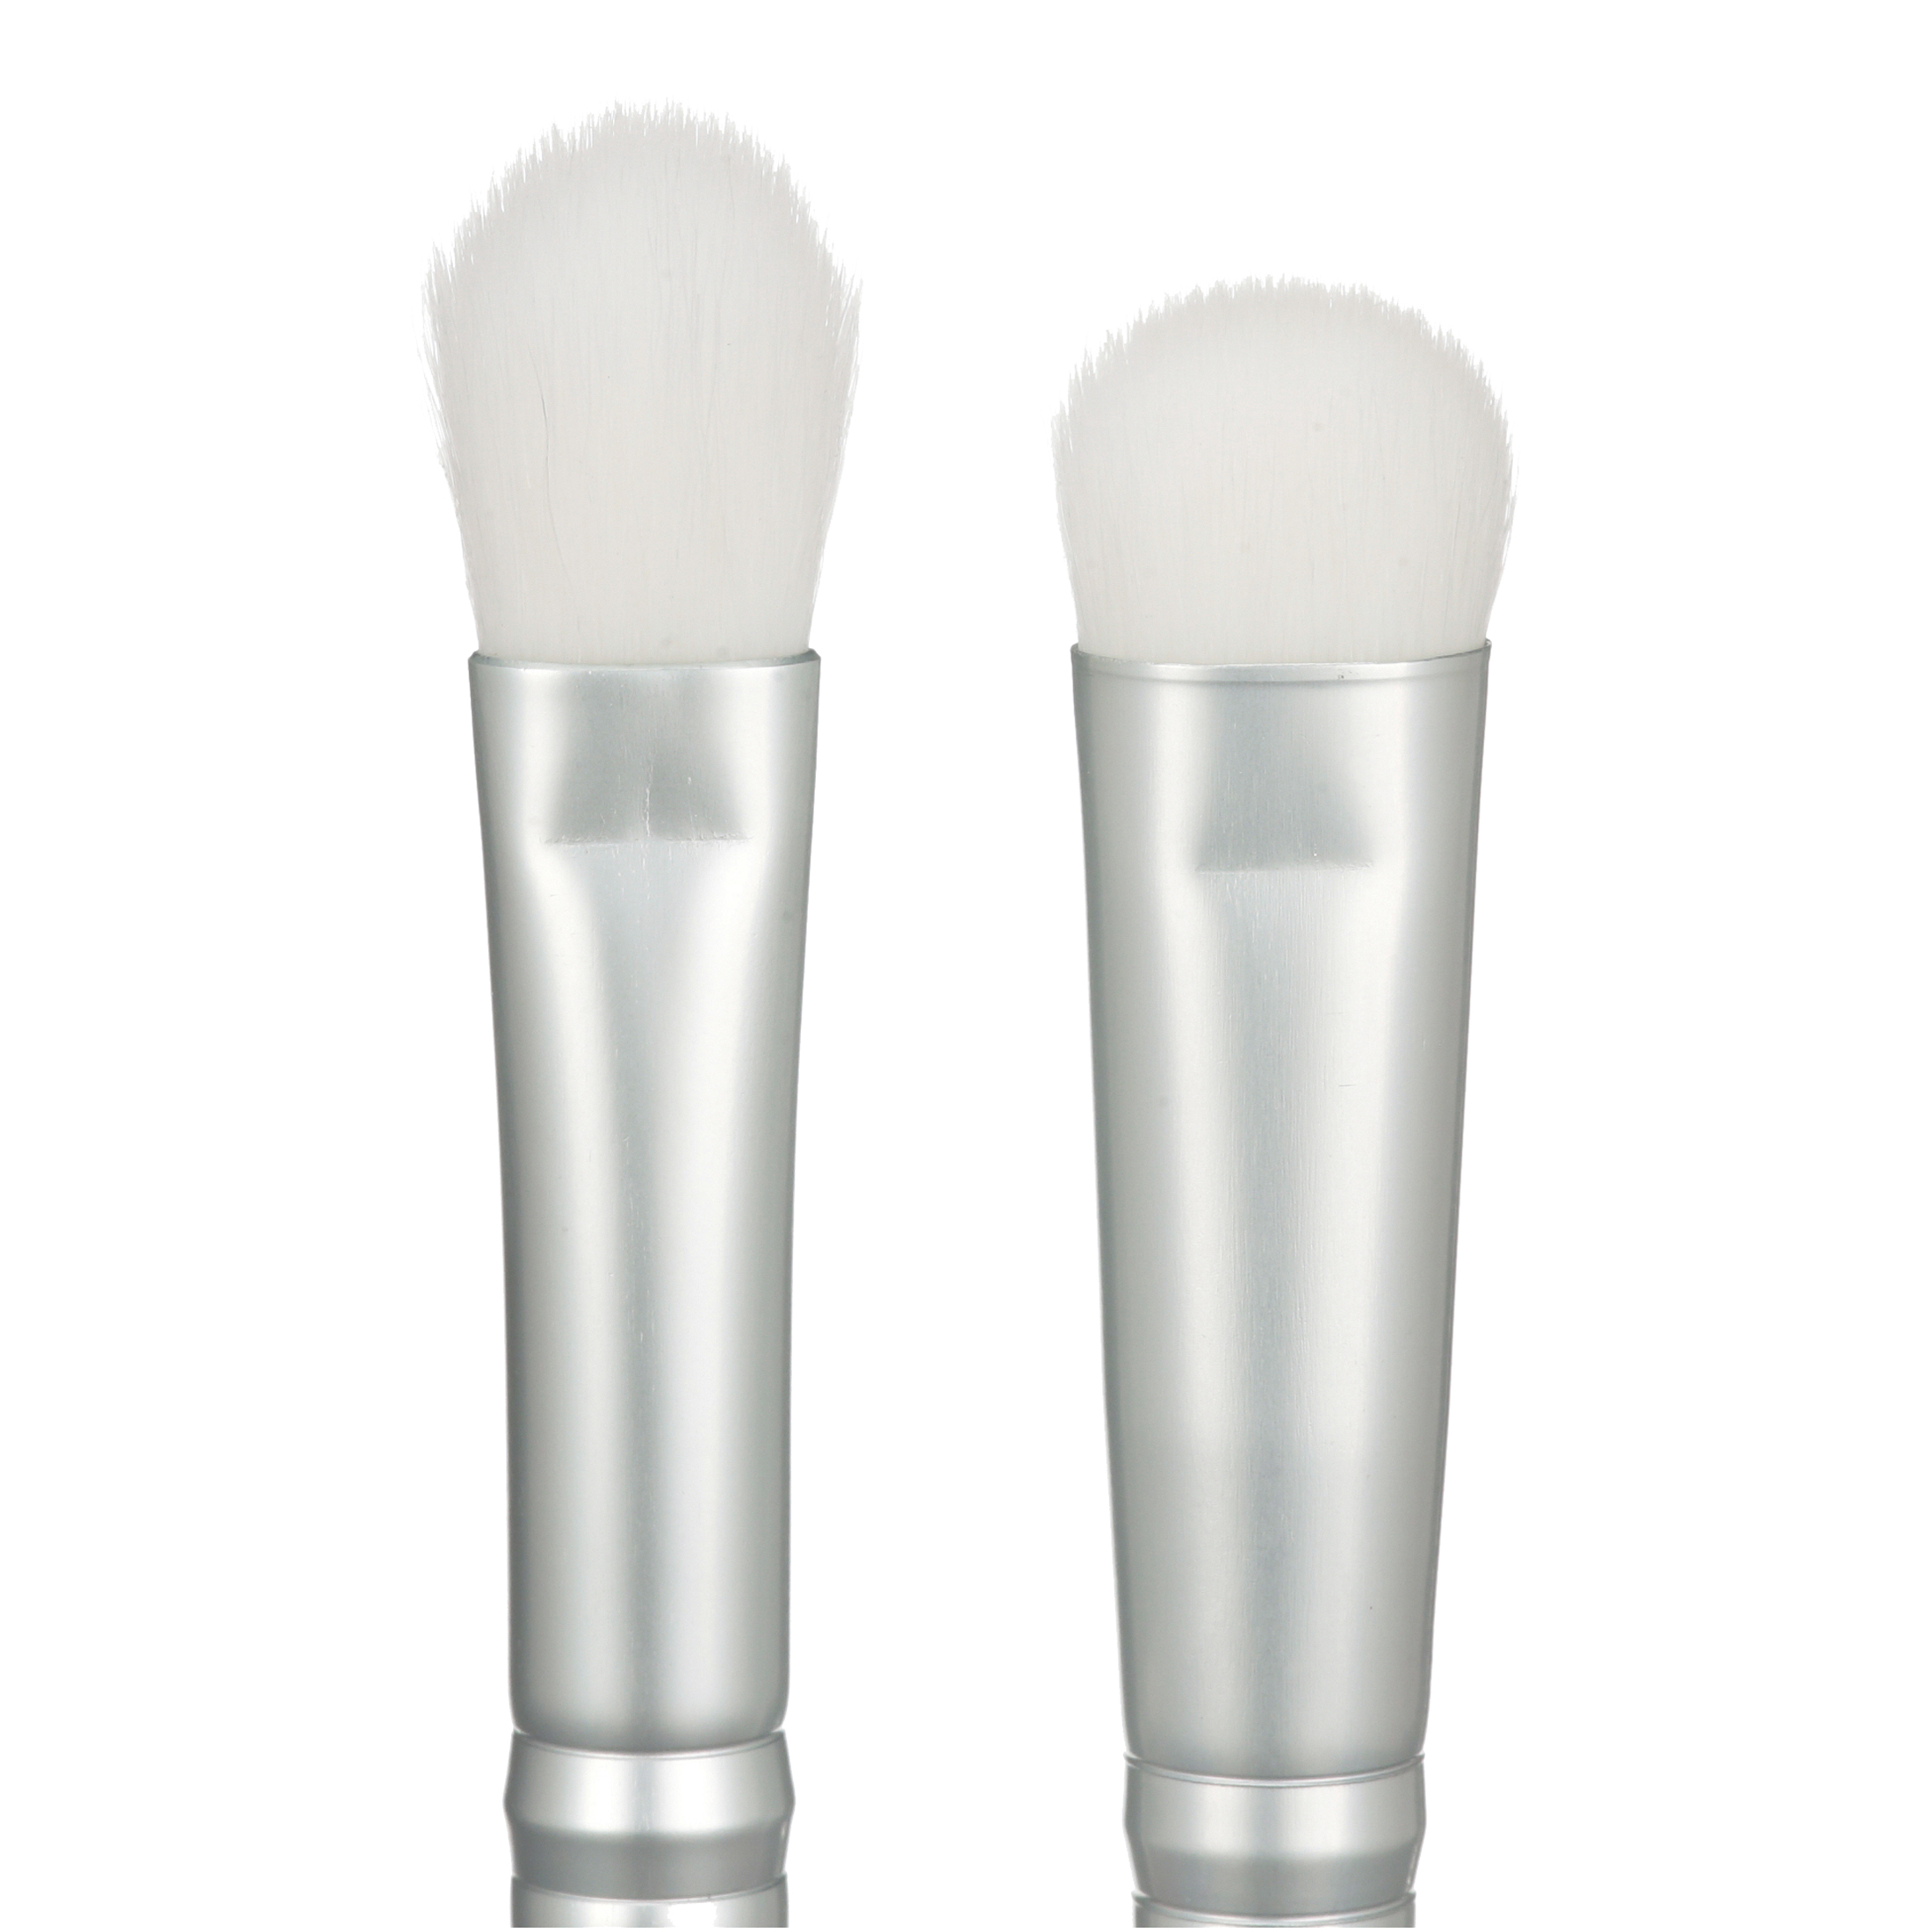 ($23 Value) e.l.f. Candy Cane 7 Piece Holiday Makeup Brush Set, Face & Eye - image 5 of 9